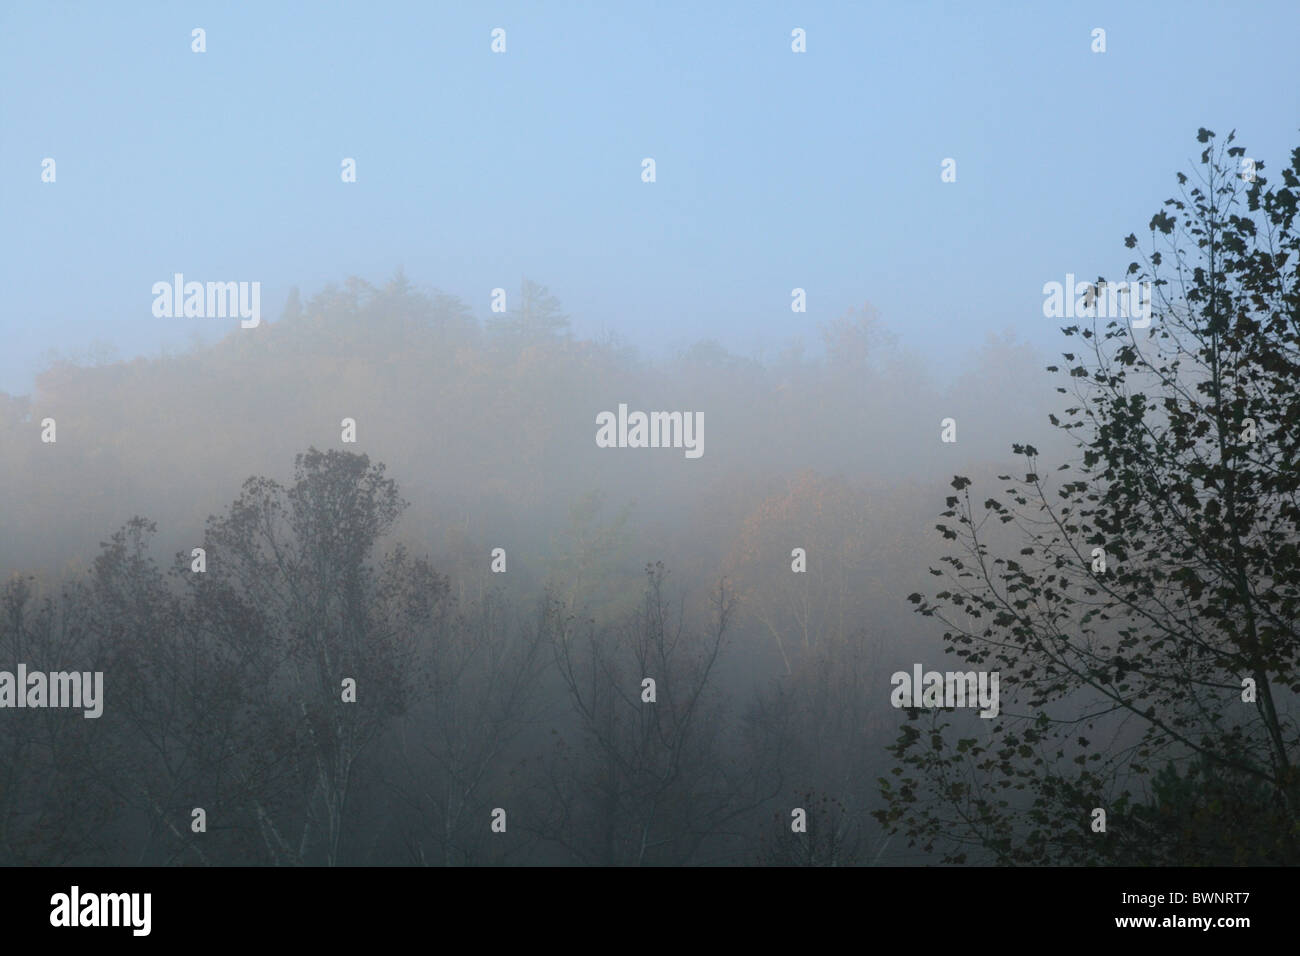 image of tree tops in a foggy forest in fall Stock Photo